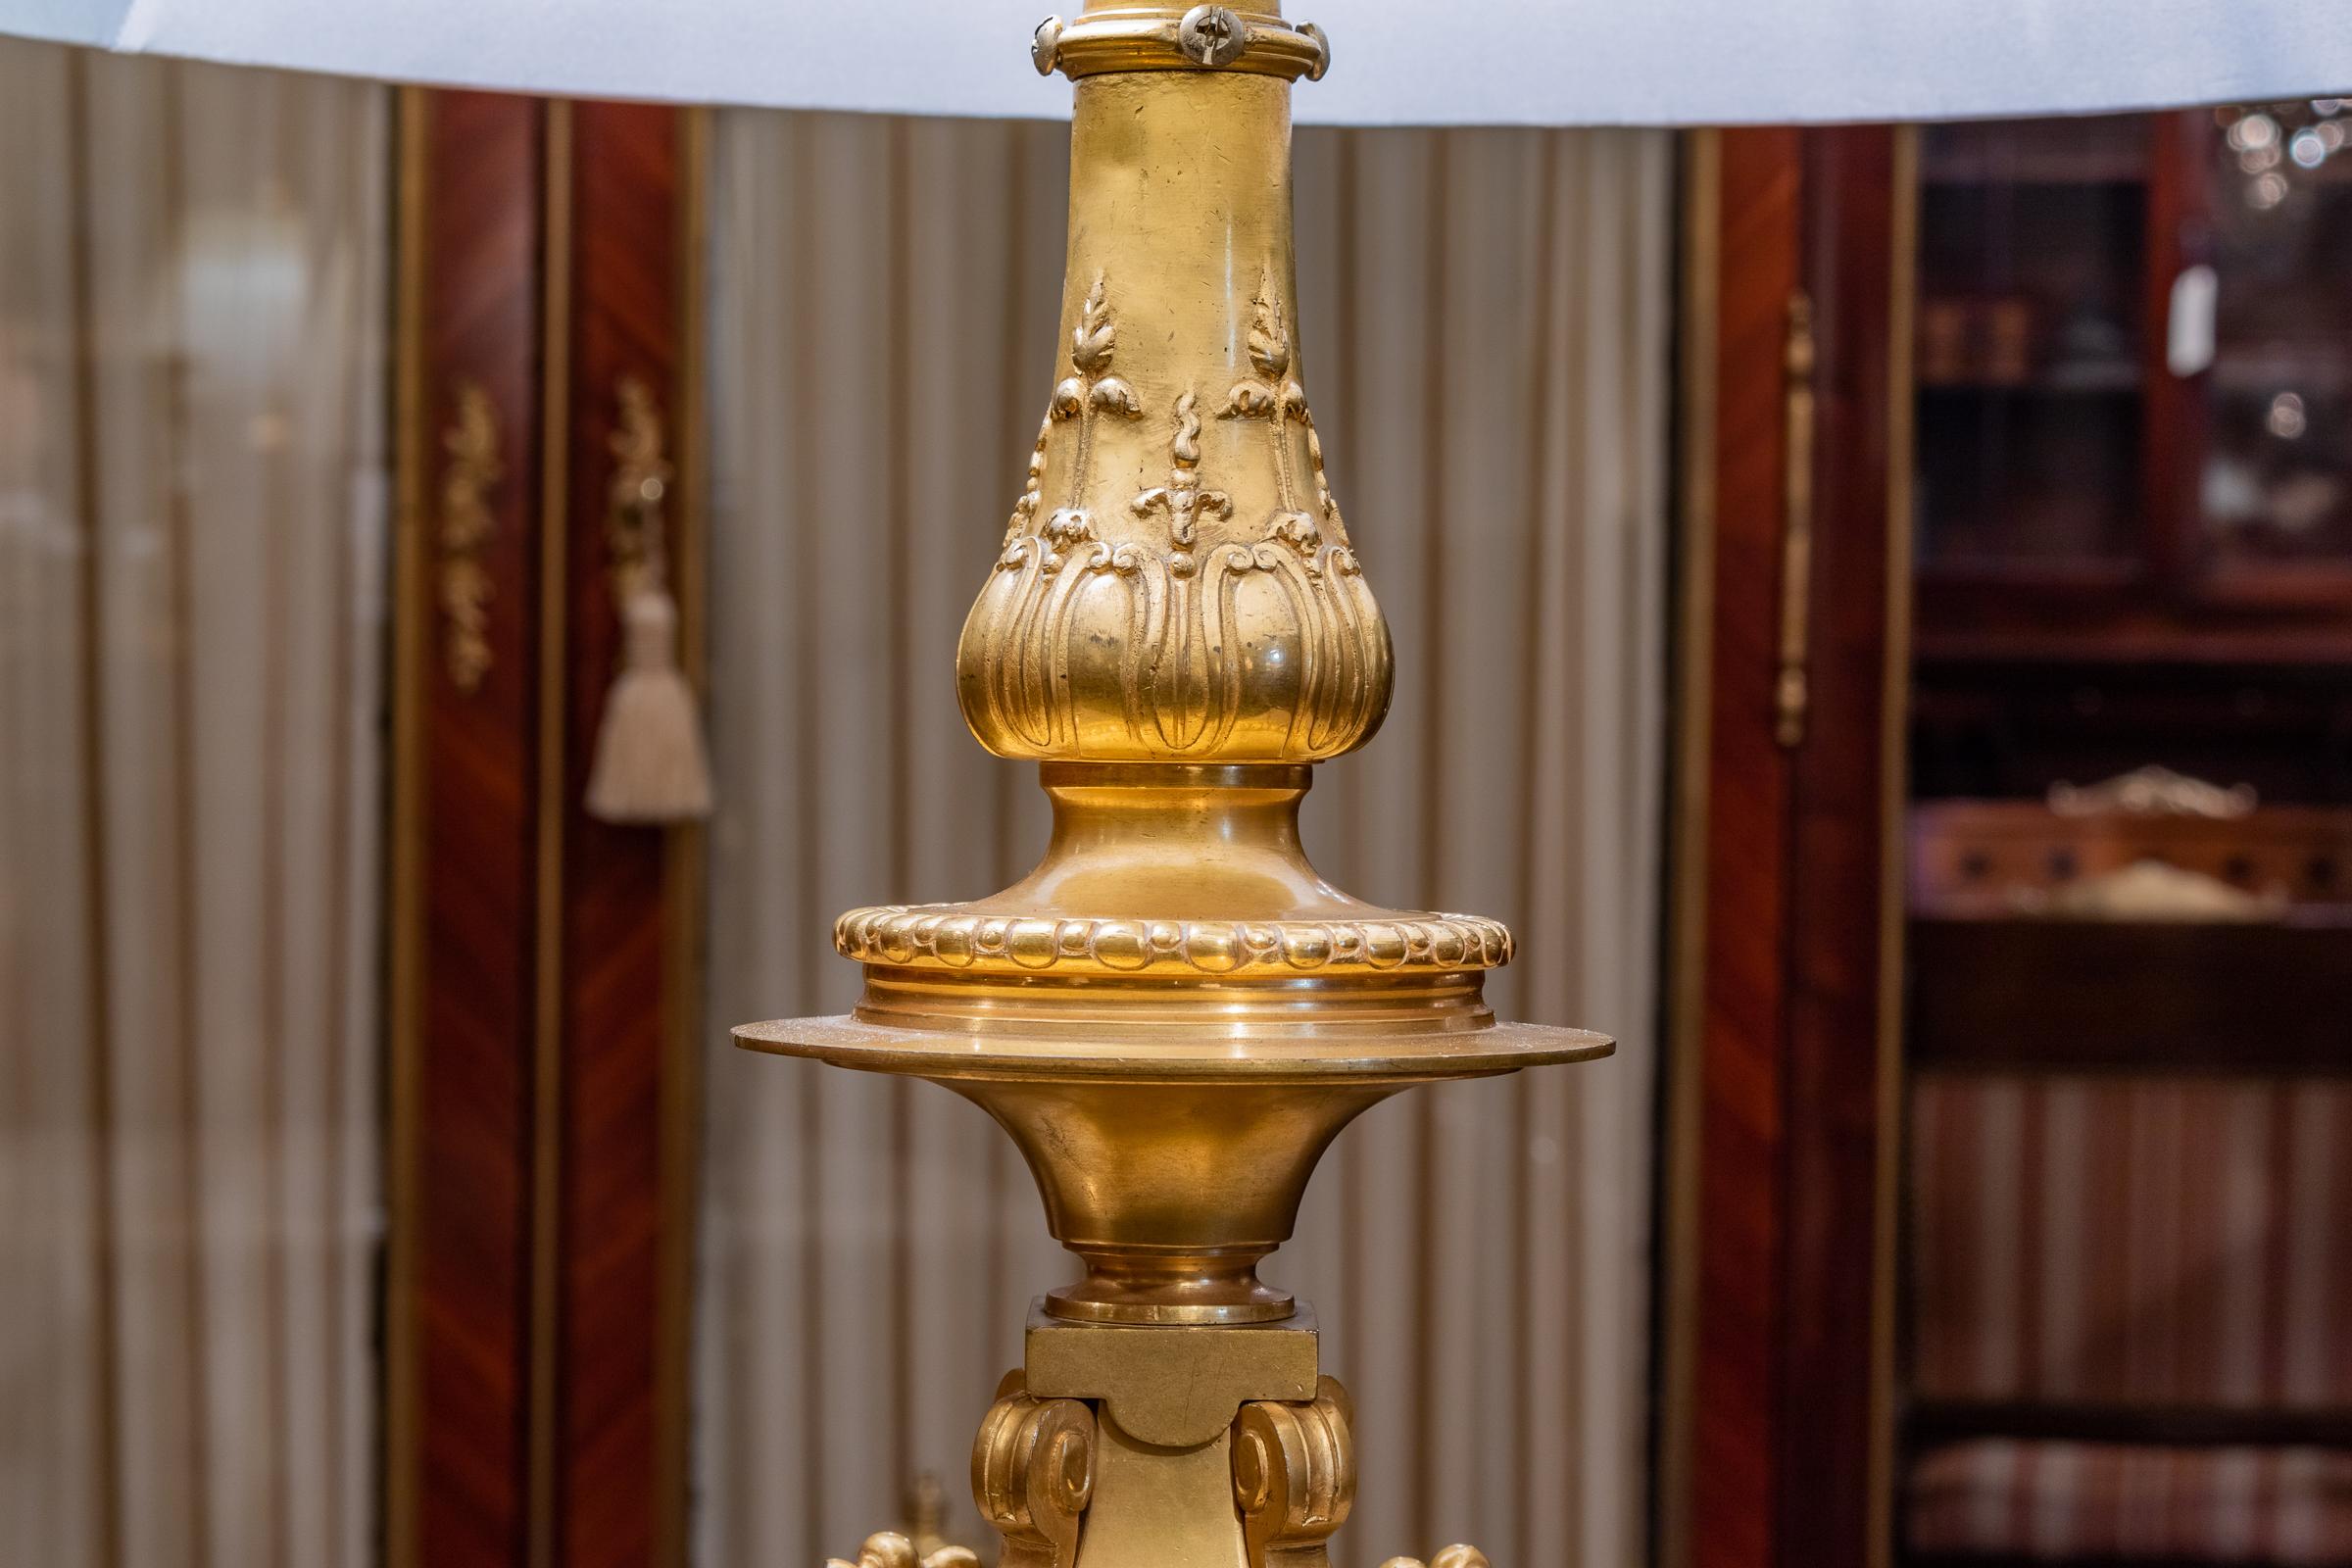 Finest Quality French 19th Century Gilt Bronze and Marble Lamp In Excellent Condition For Sale In Dallas, TX